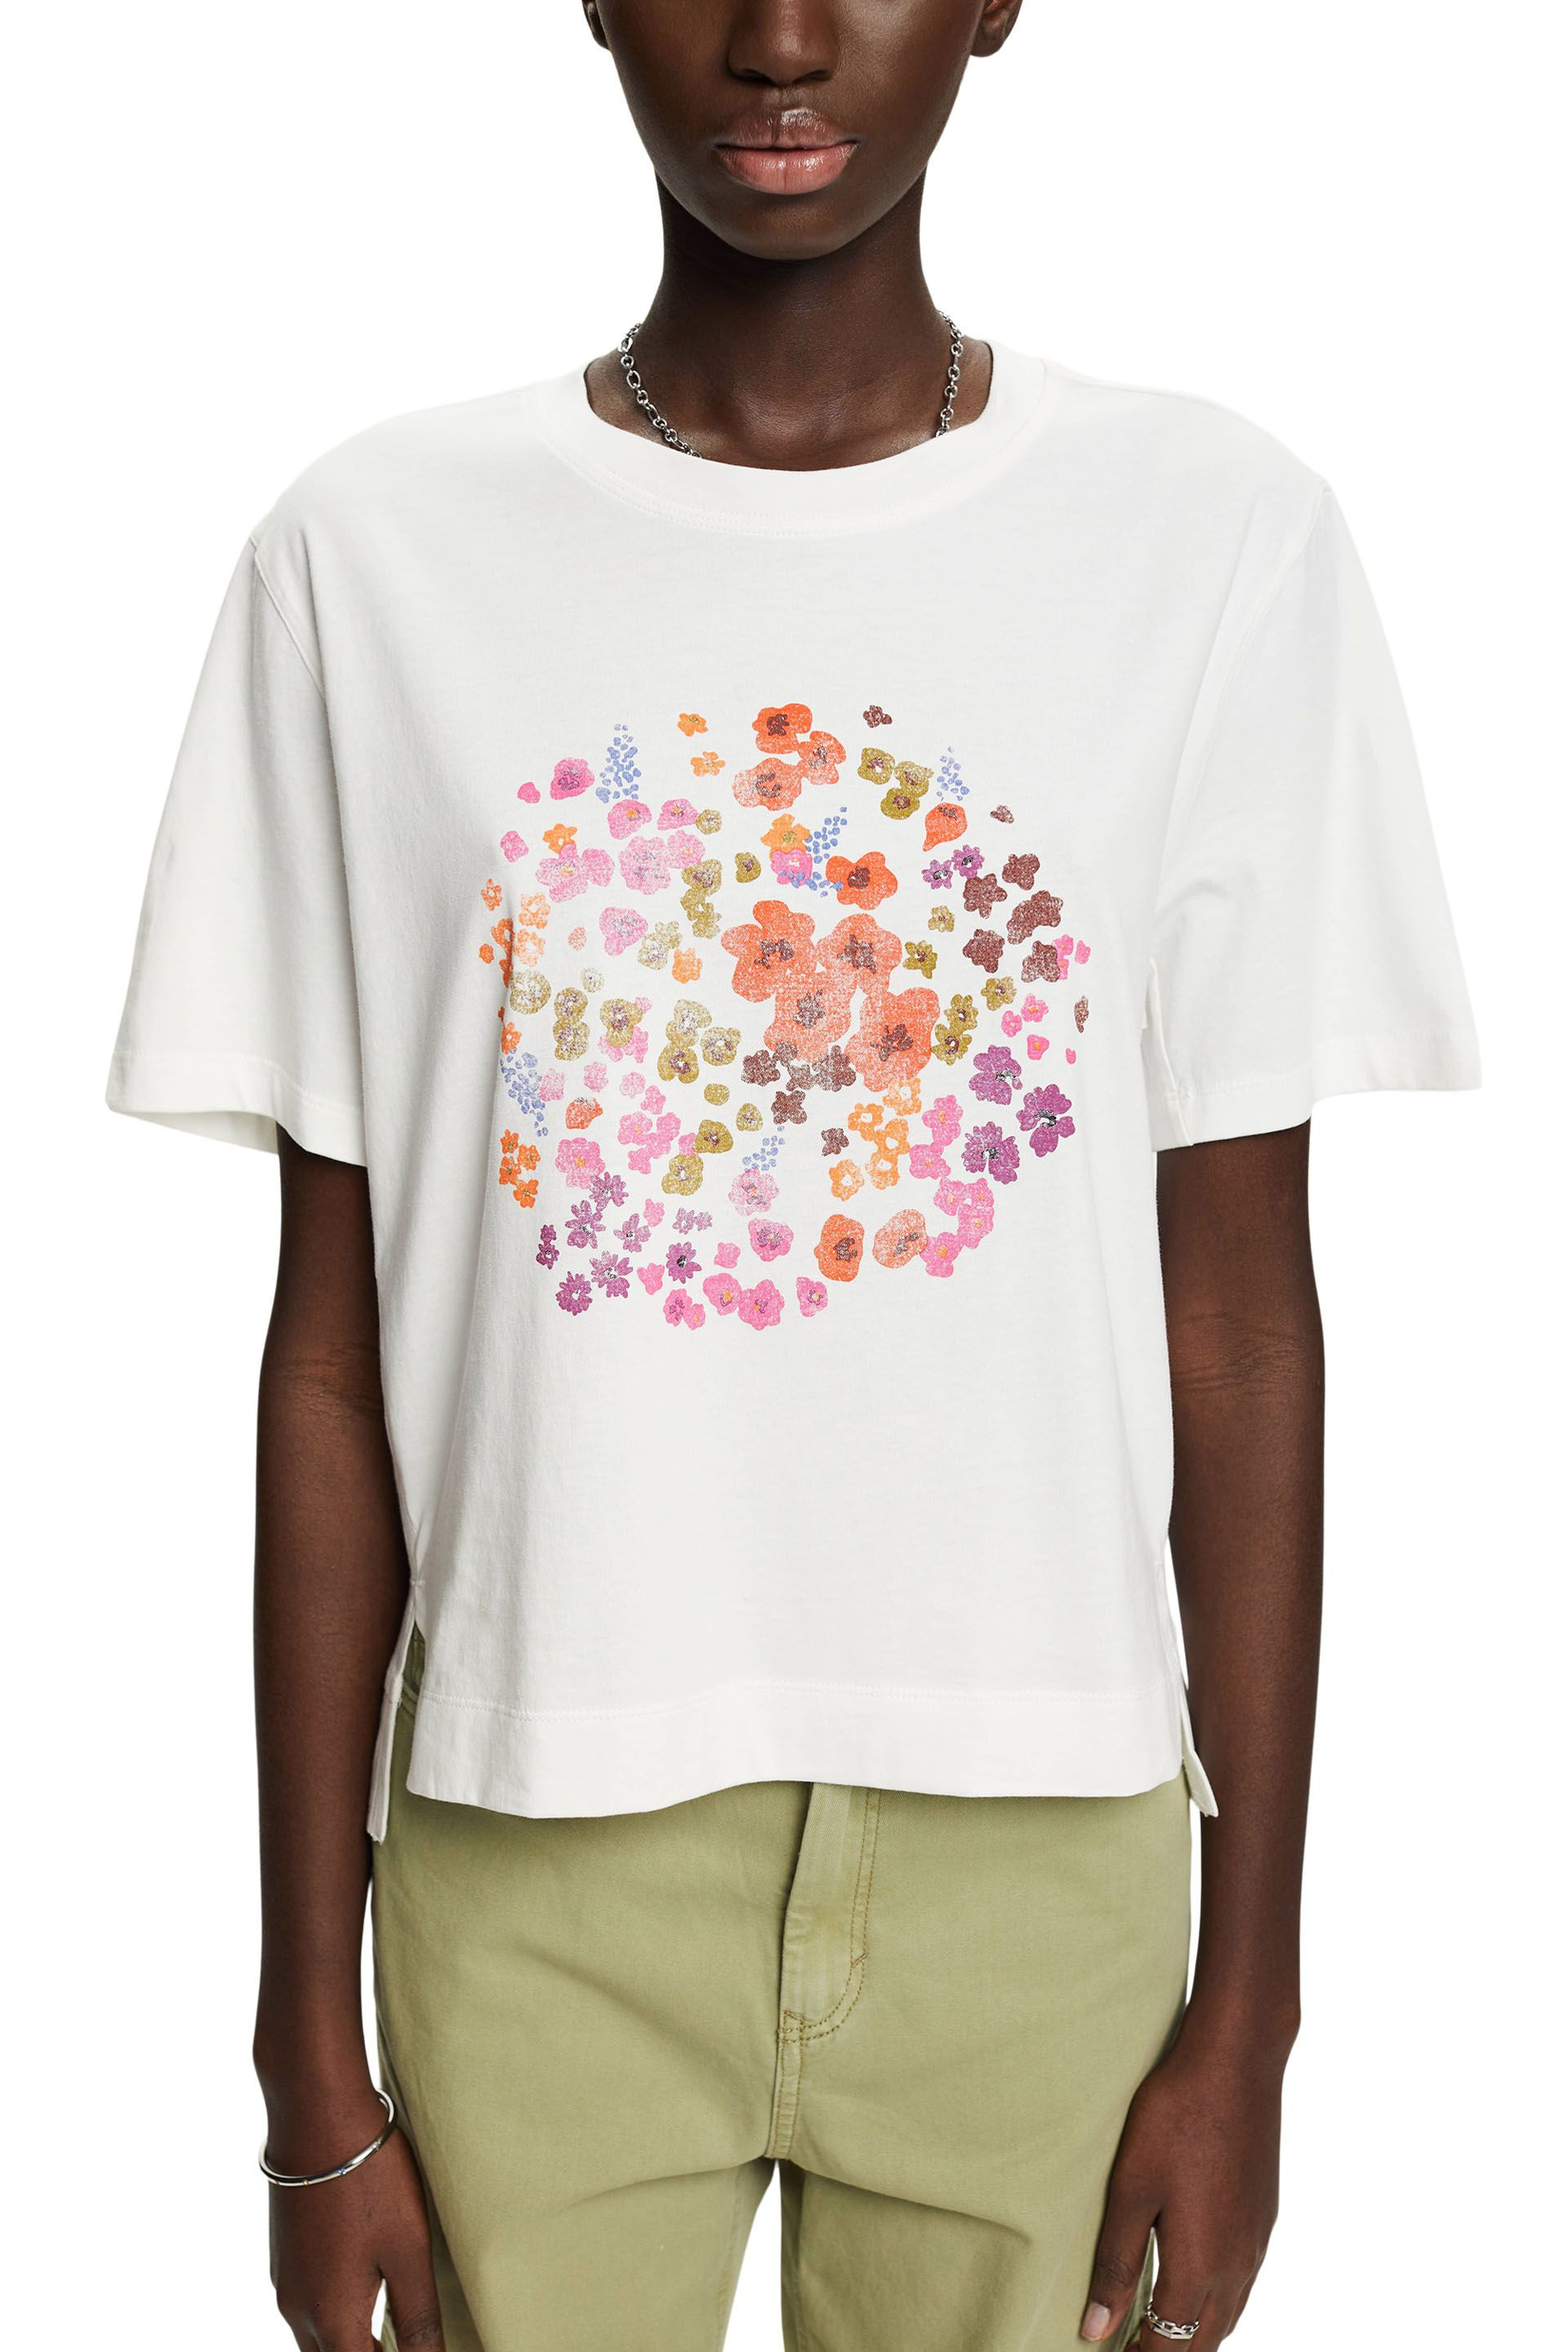 Esprit - T-shirt with floral print, White, large image number 2